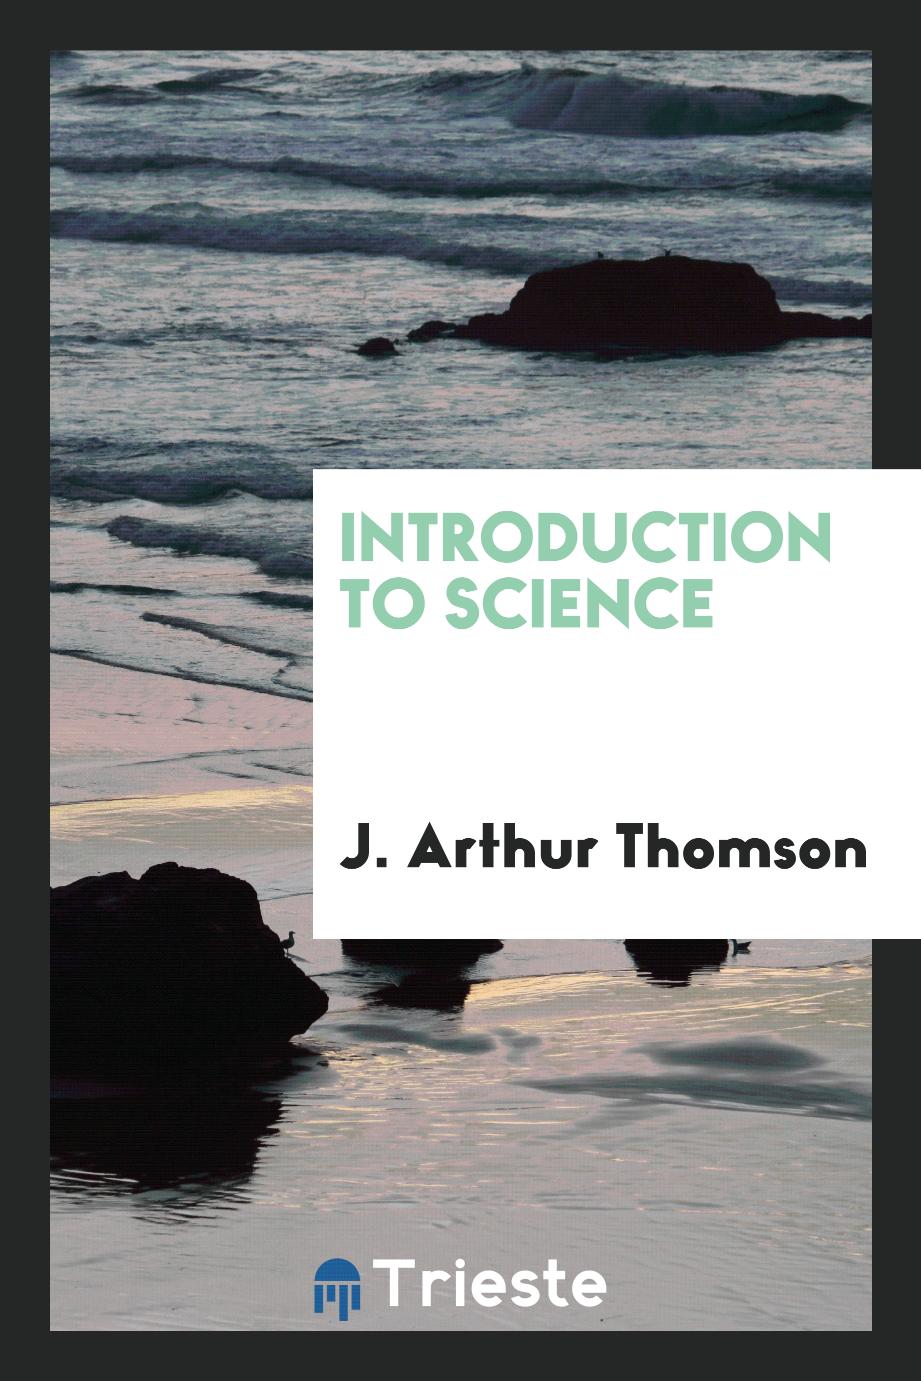 Introduction to science